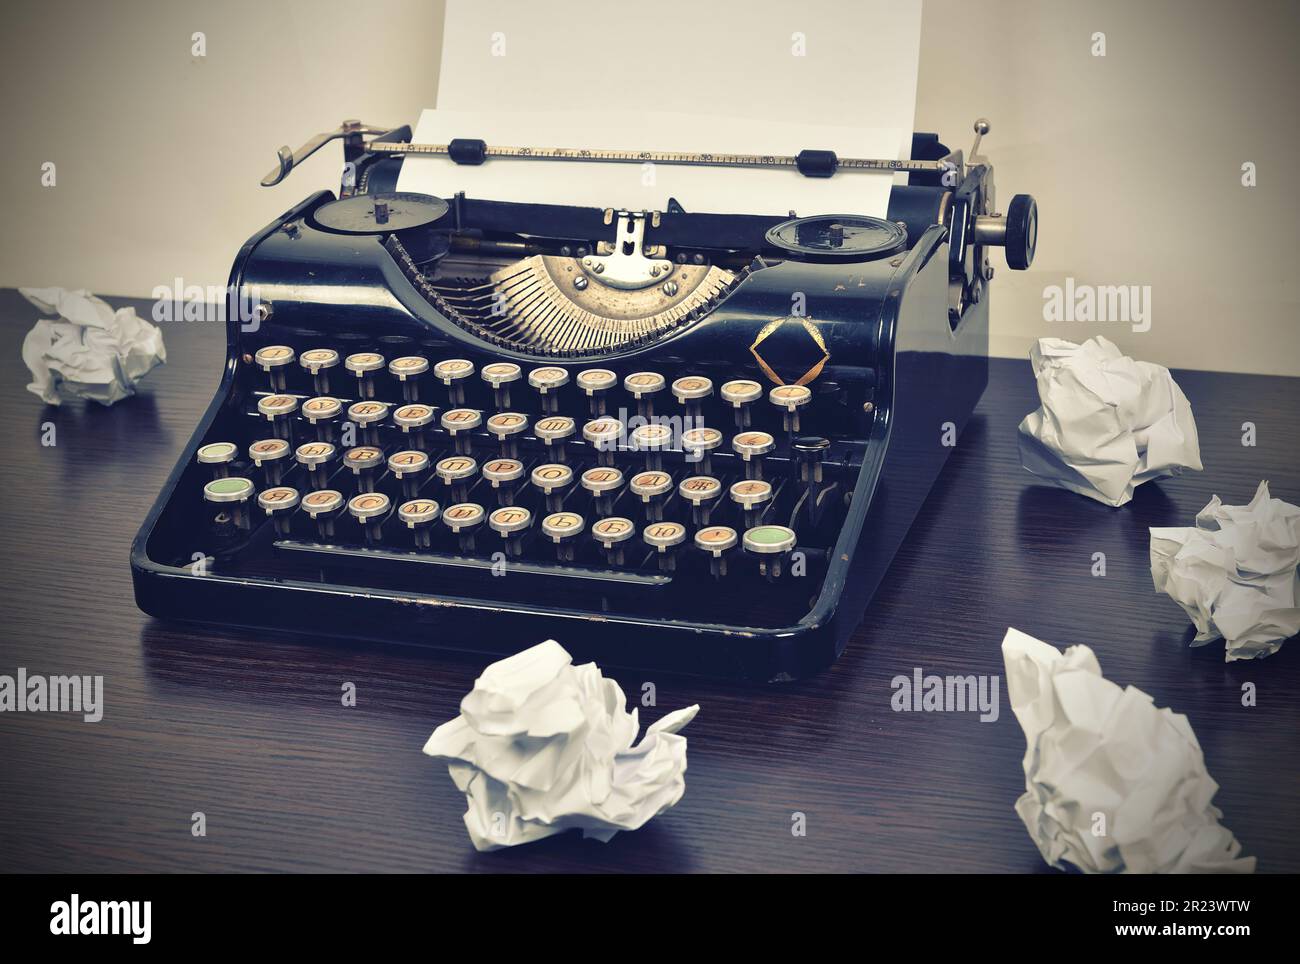 Vintage typewriter with a blank piece of paper Stock Photo - Alamy